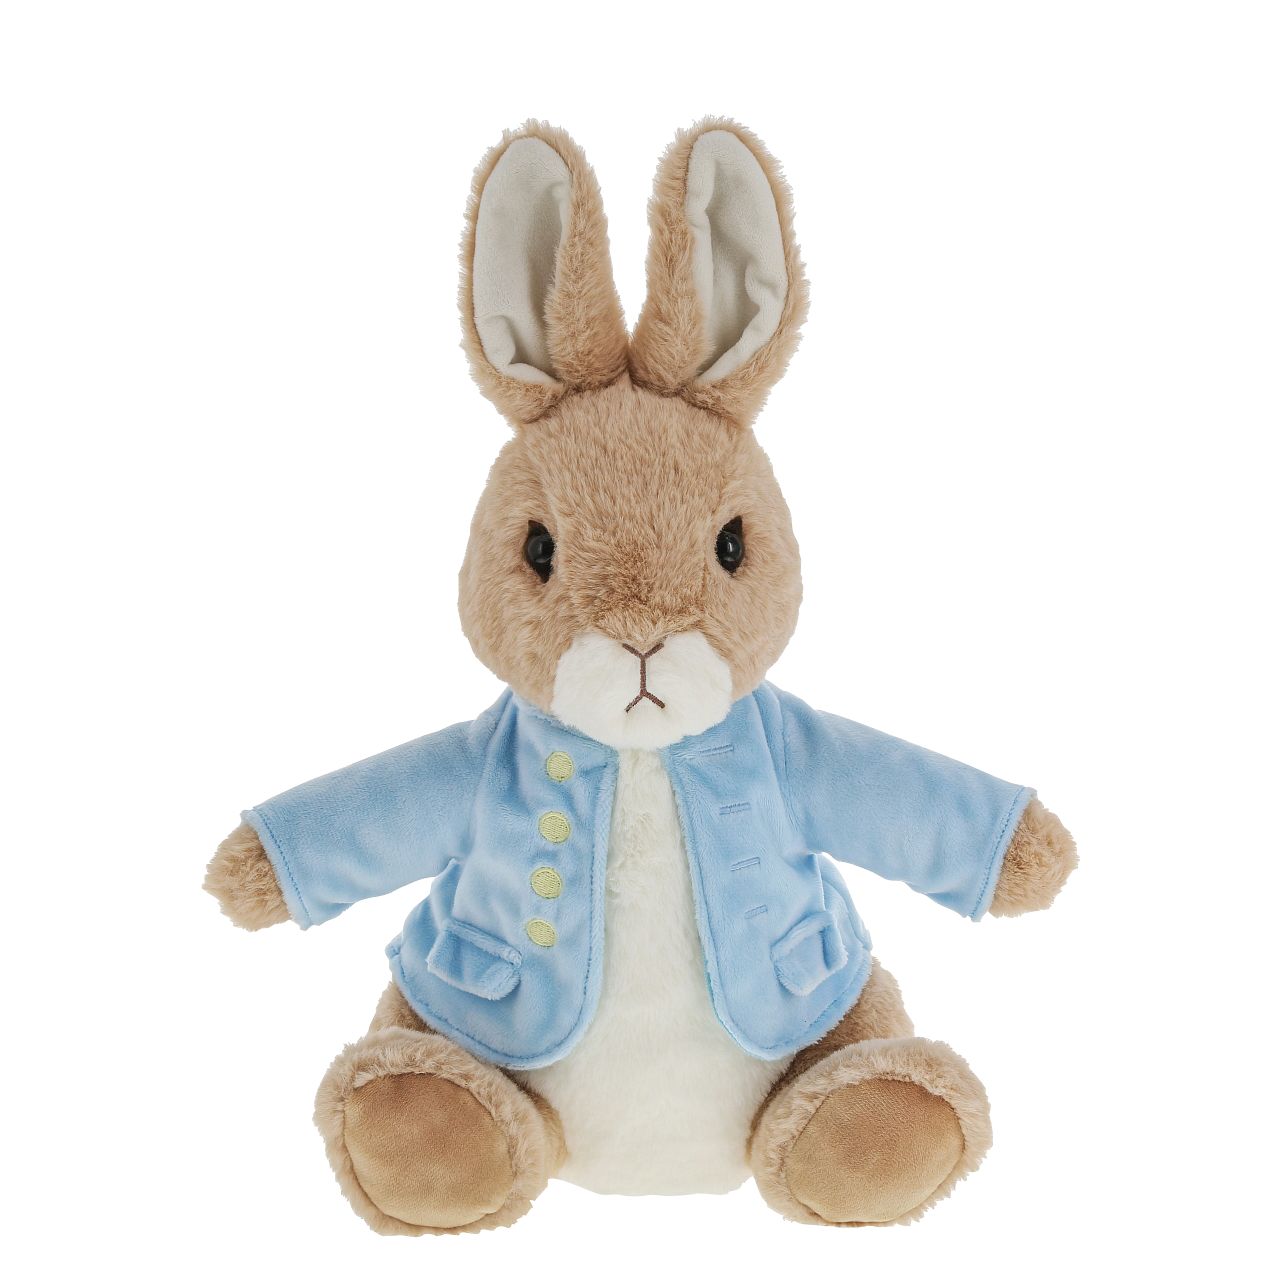 Beatrix Potter Peter Rabbit Extra Large Soft Toy  This Extra Large Peter Rabbit soft toy is even more huggable than the last. Peter Rabbit has been made from beautifully soft fabric and has been dressed in clothing exactly as illustrated by Beatrix Potter, with his signature blue jacket.